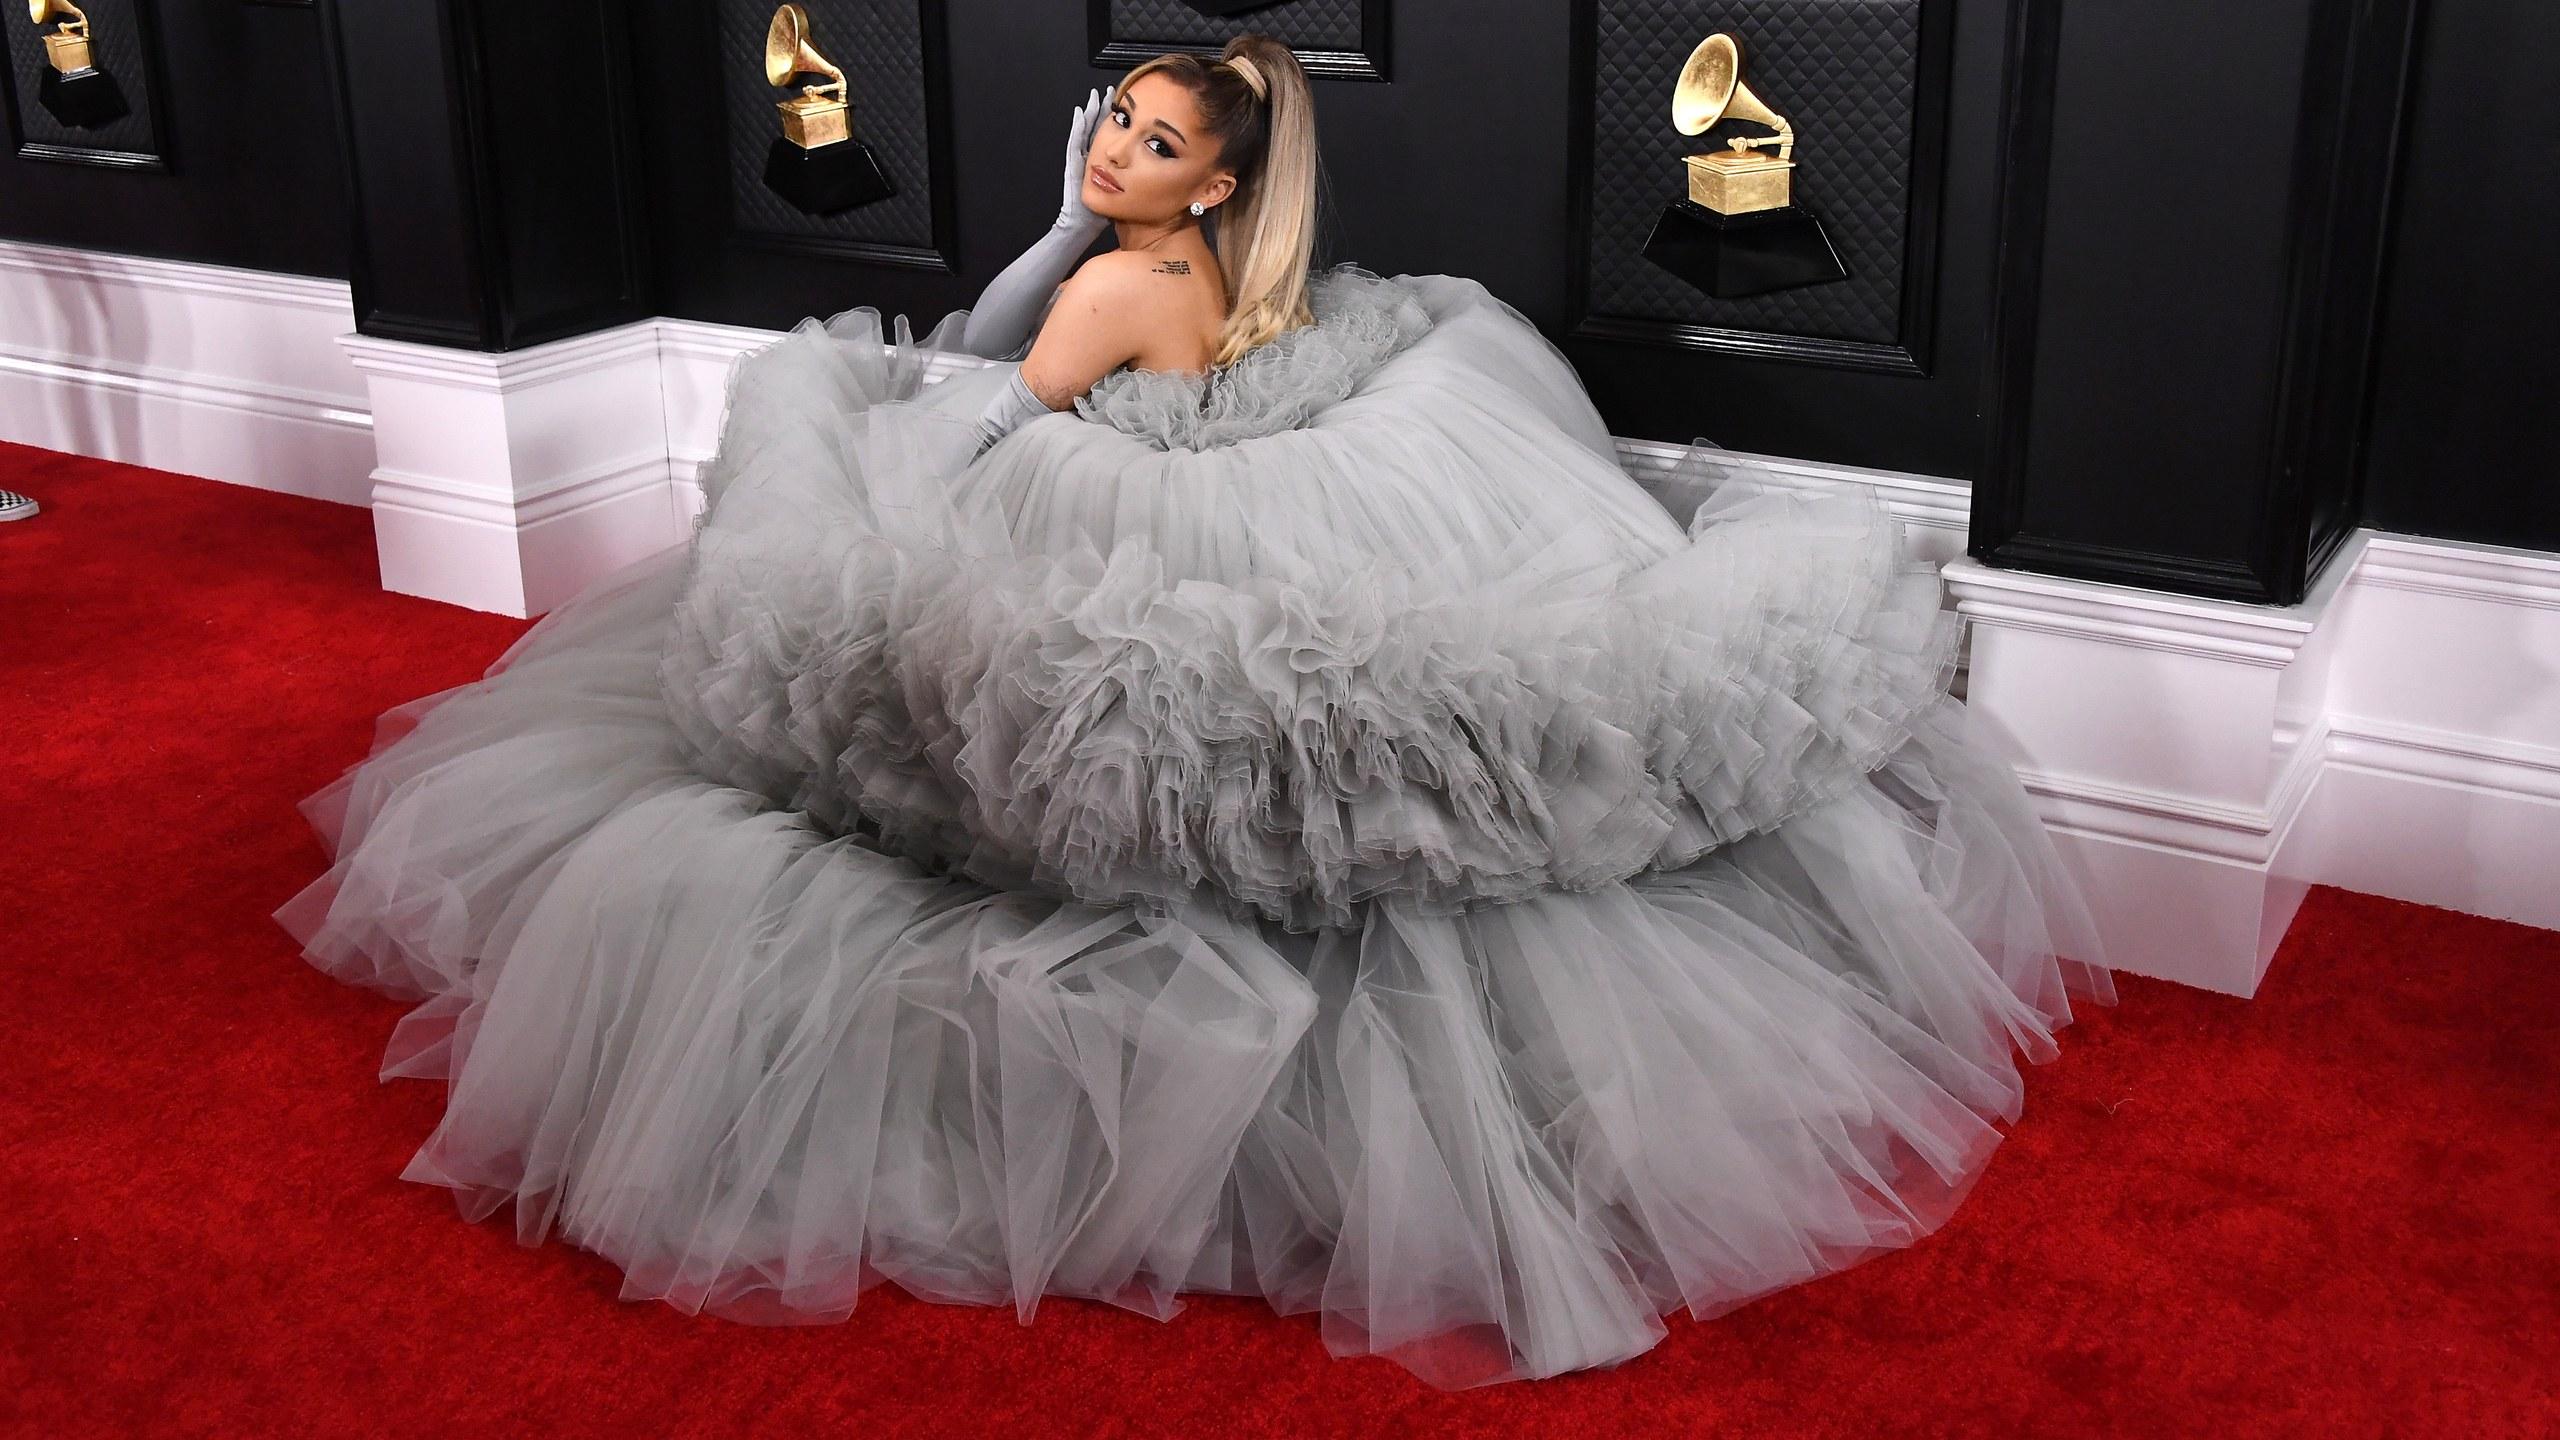 Ariana Grande's Grammys Dress Is the Right Amount of Extra